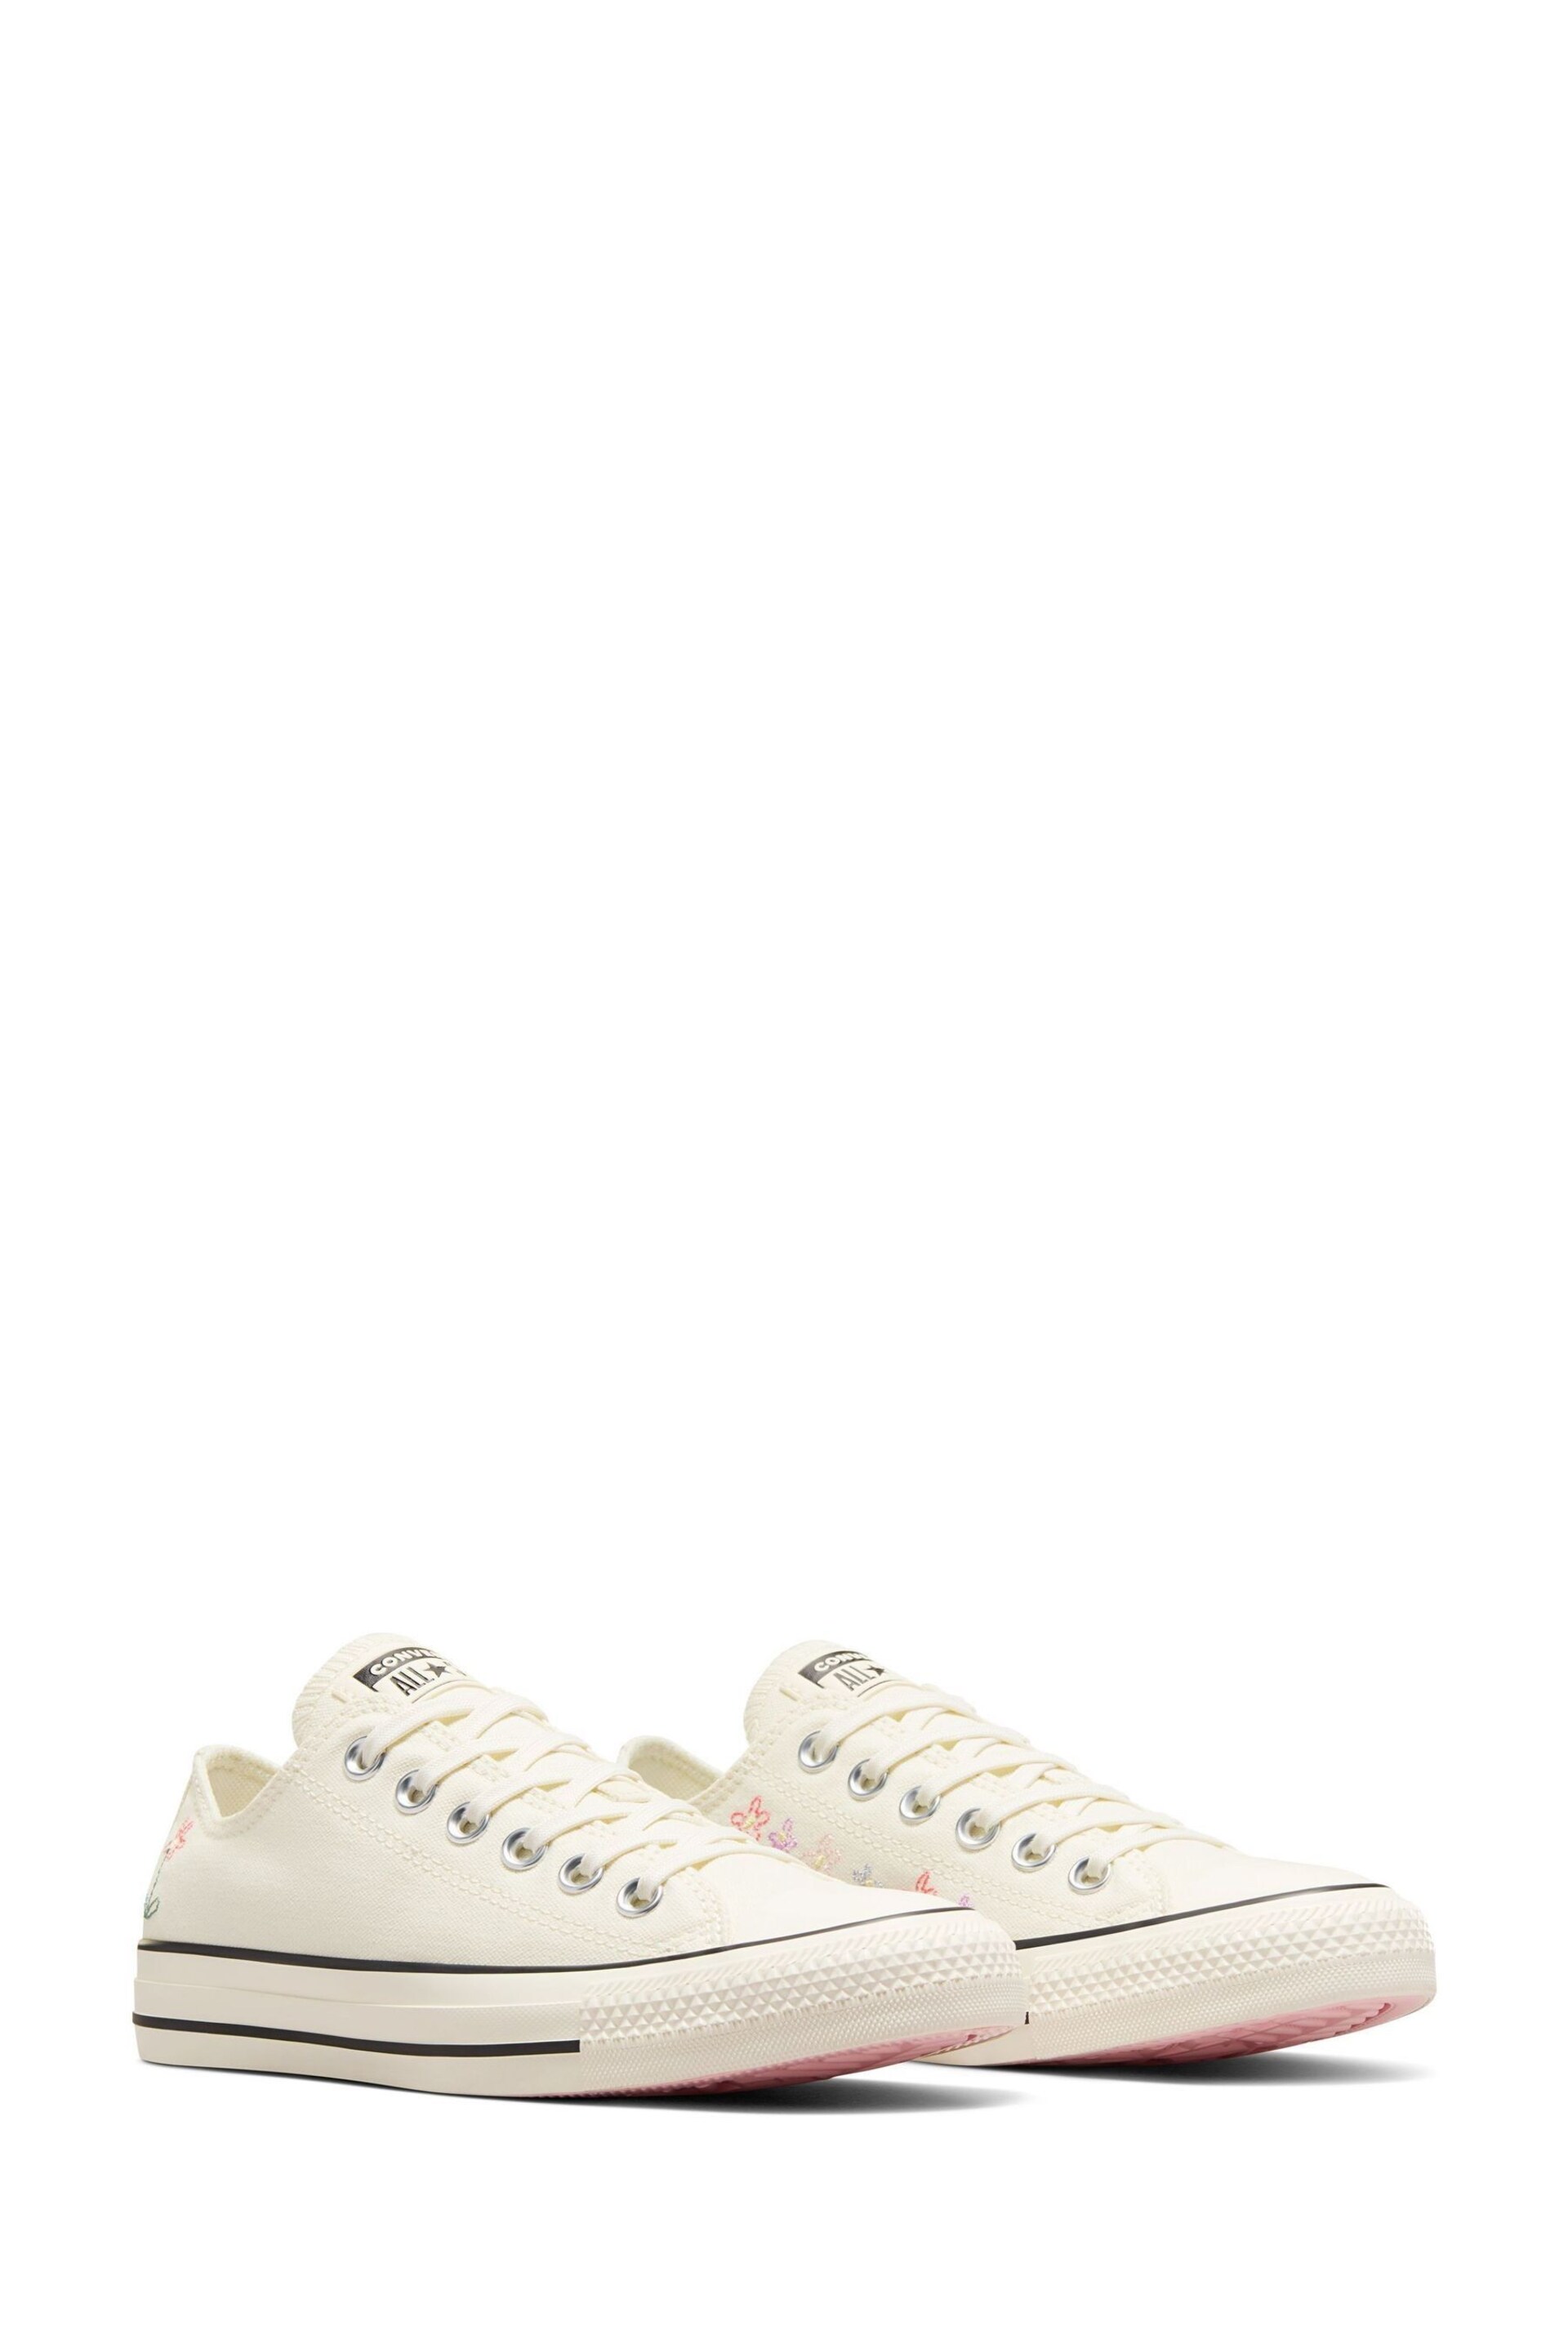 Converse Cream Chuck Taylor All Star Ox Trainers - Image 8 of 11